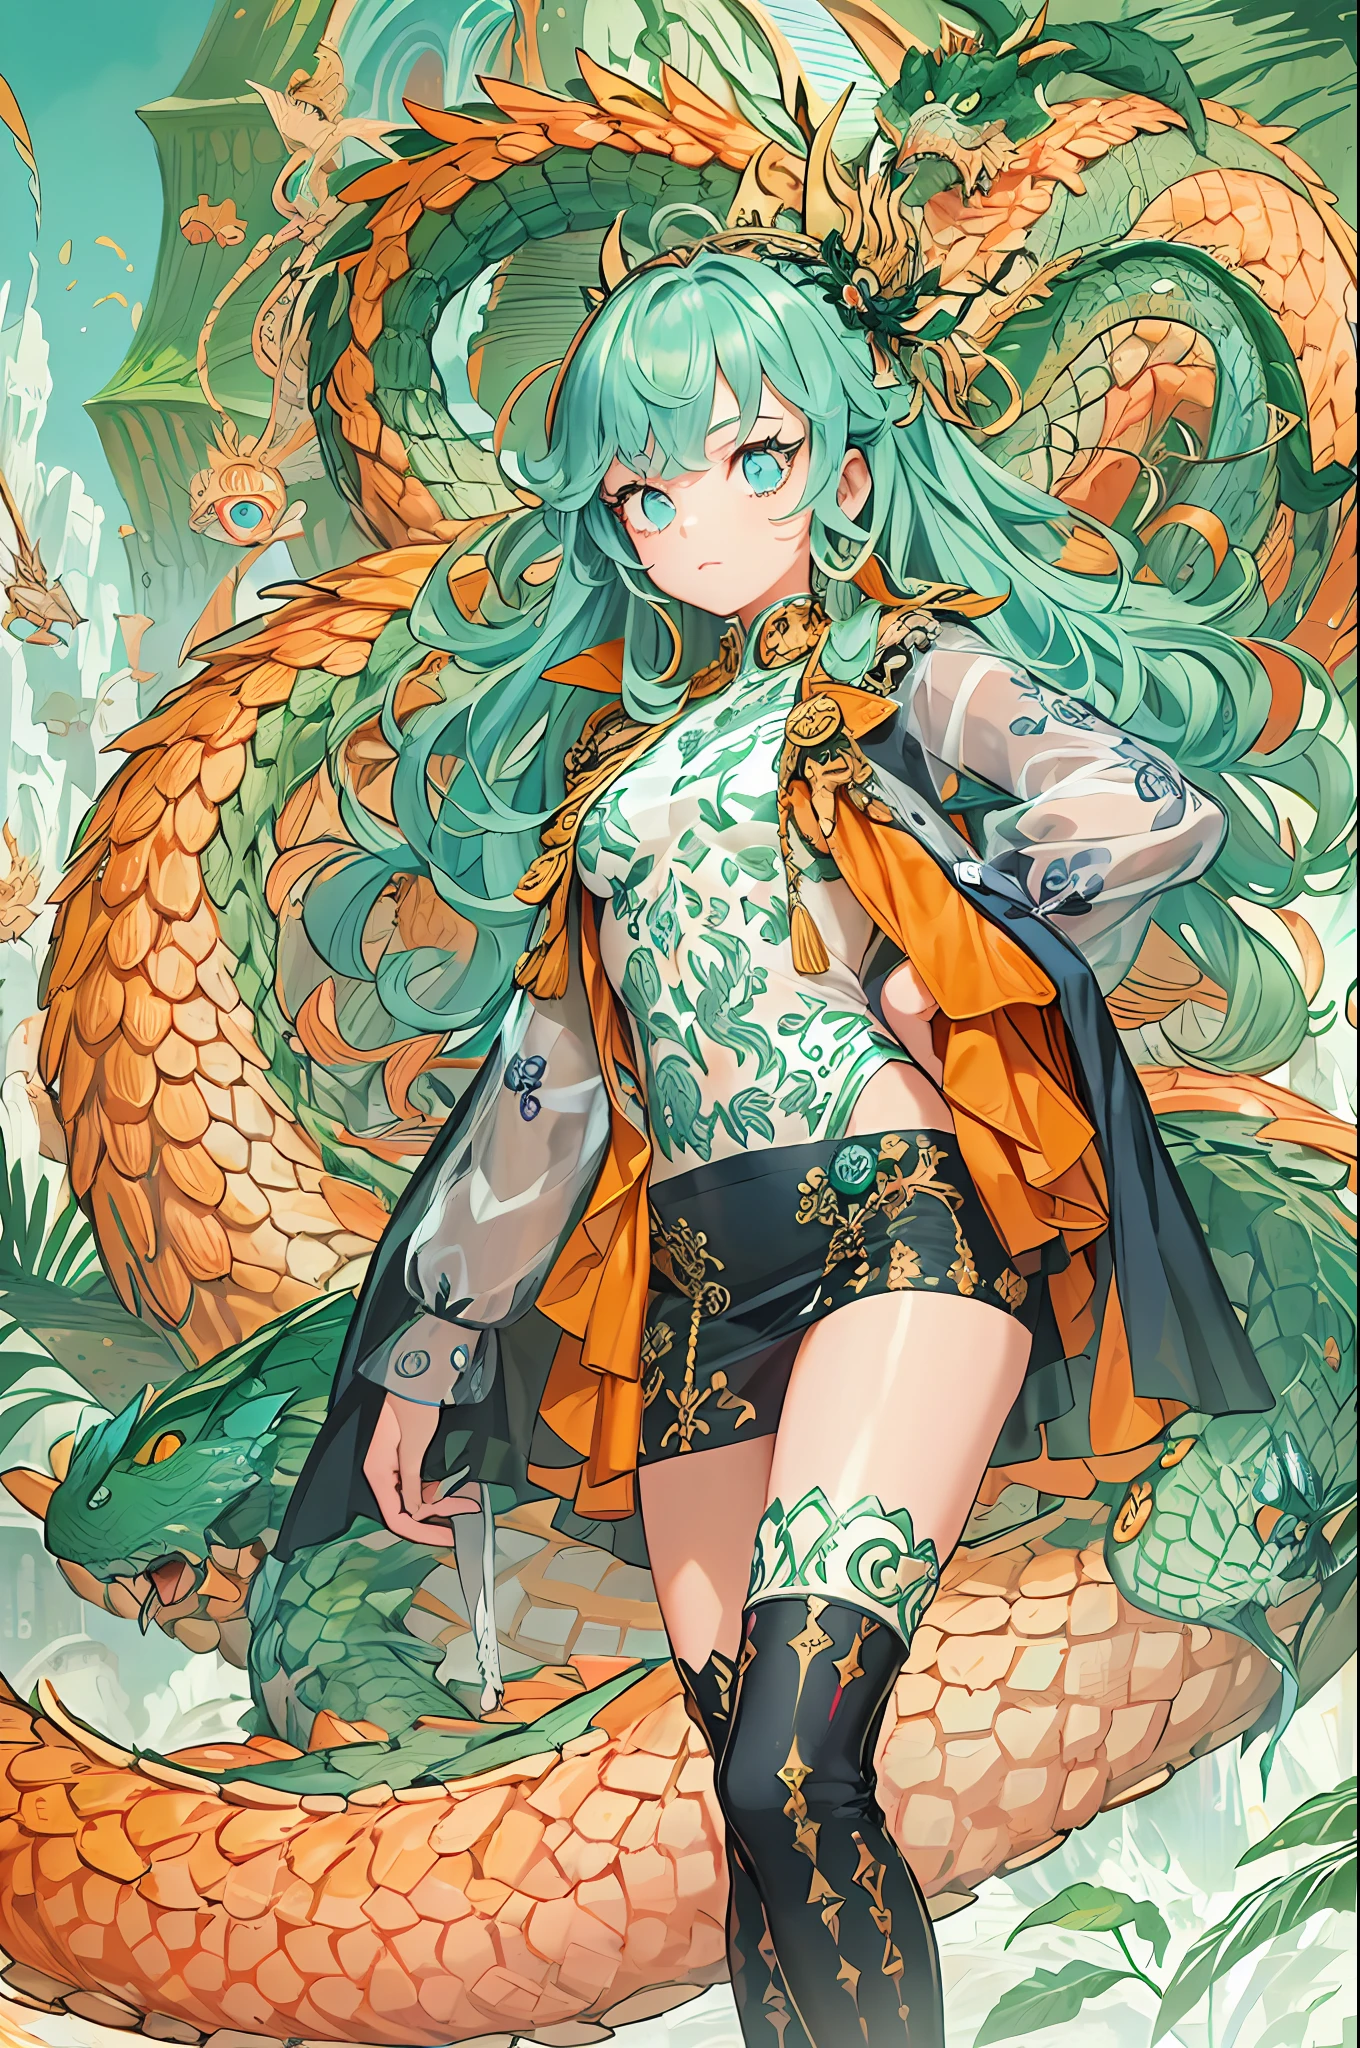 "1girl with orange and blue hair and bright silver eyes, wearing a modern and fashionable outfit, with ultra-curly hair. She is posing in a cute and floating position, surrounded by a magnificent and highly-detailed background. There is also a dragon with green scales and red eyes in the scene."